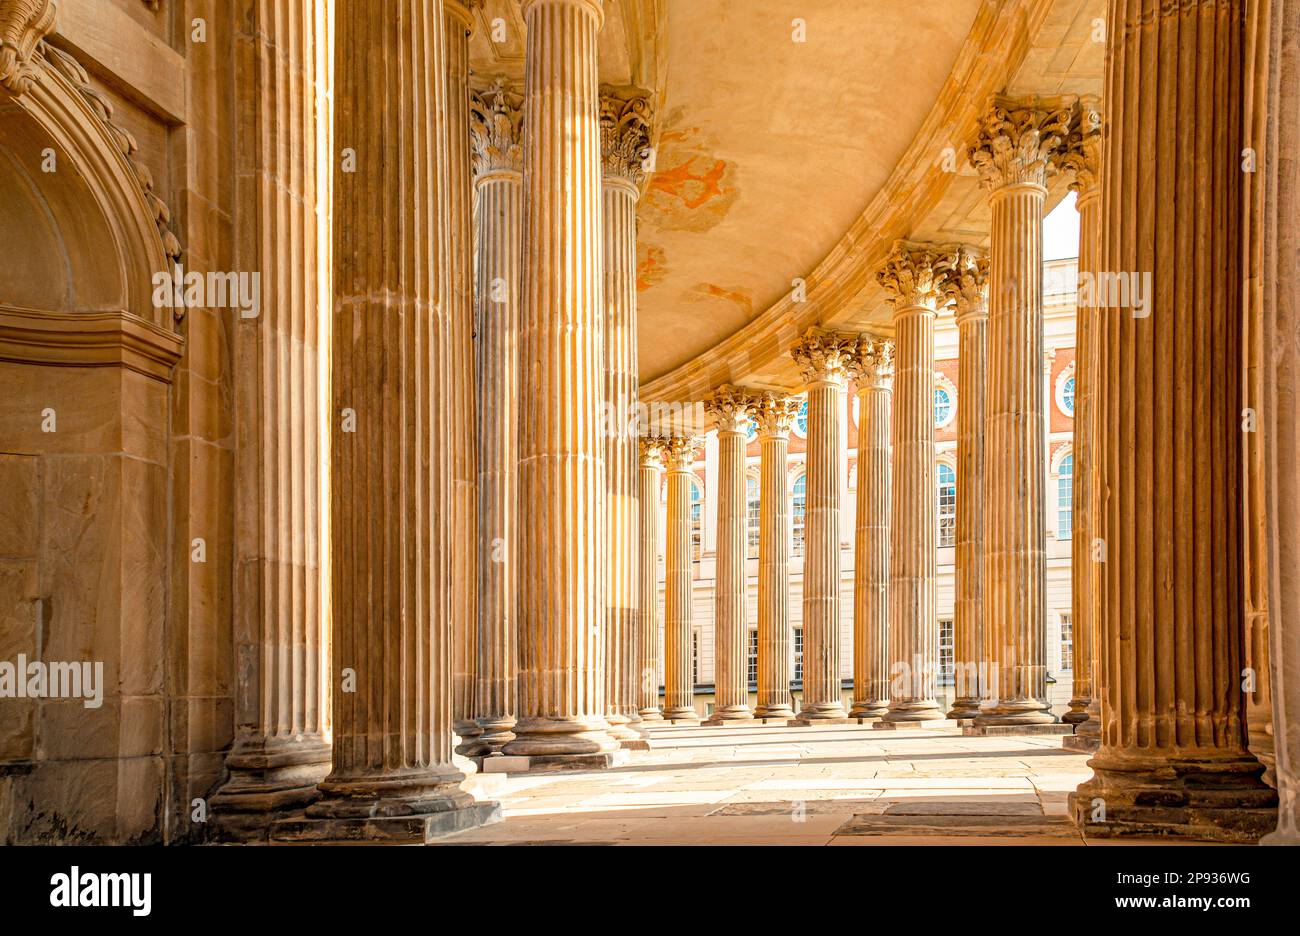 View into the ring-shaped colannades of the Neues Palais in Potsdam with symmetrical columns and Neues Palais in the background Stock Photo